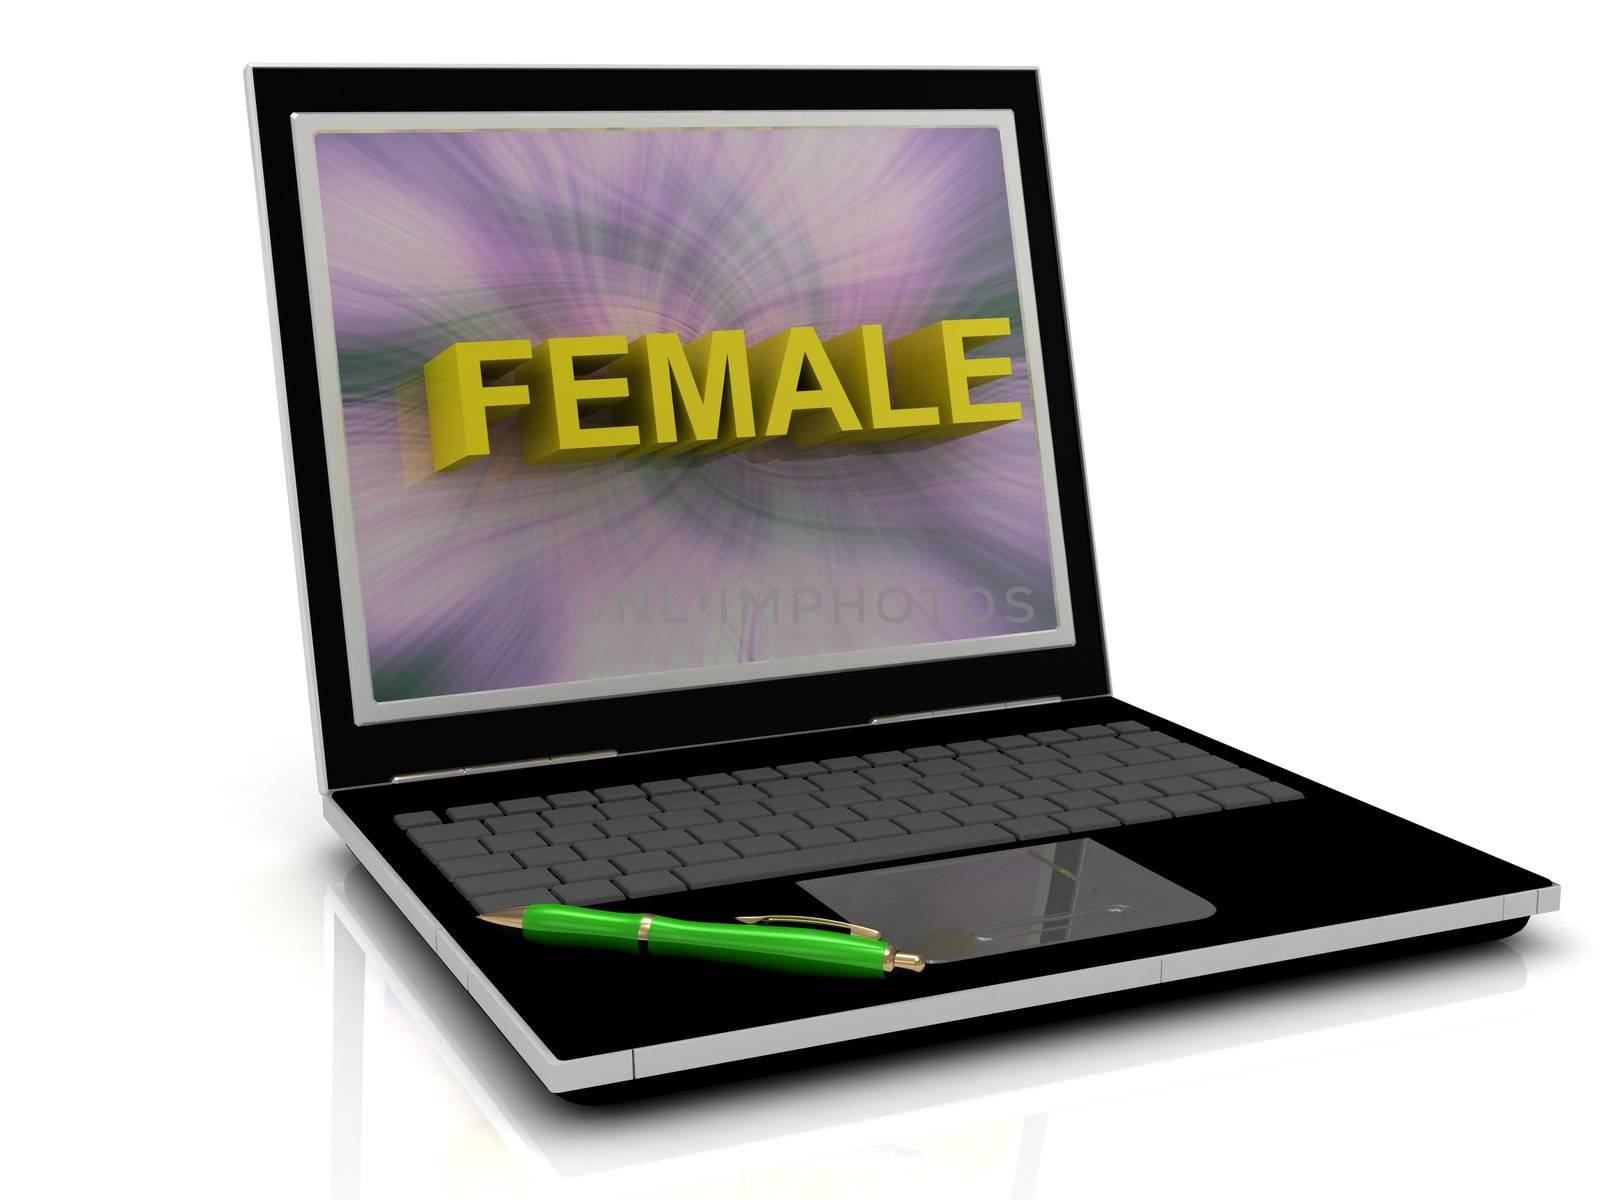 FEMALE message on laptop screen by GreenMost